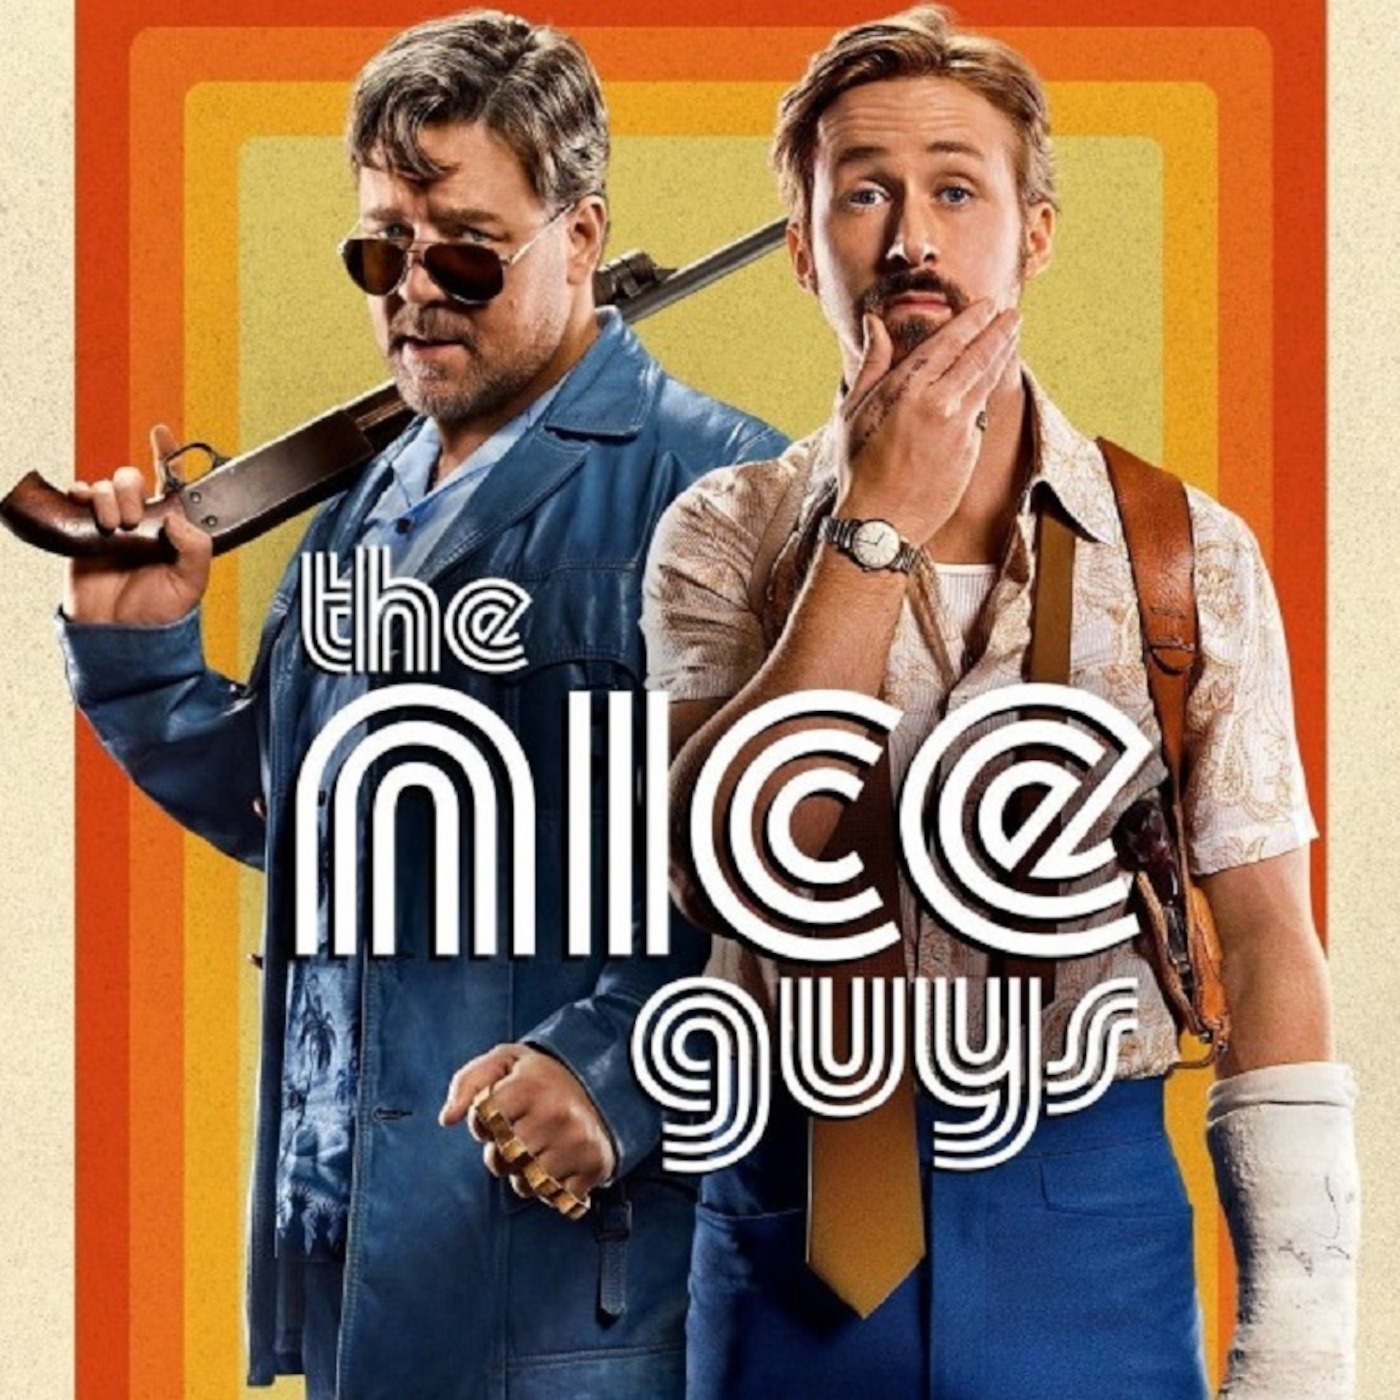 Episode 61: Top 10 Cult Films / The Nice Guys